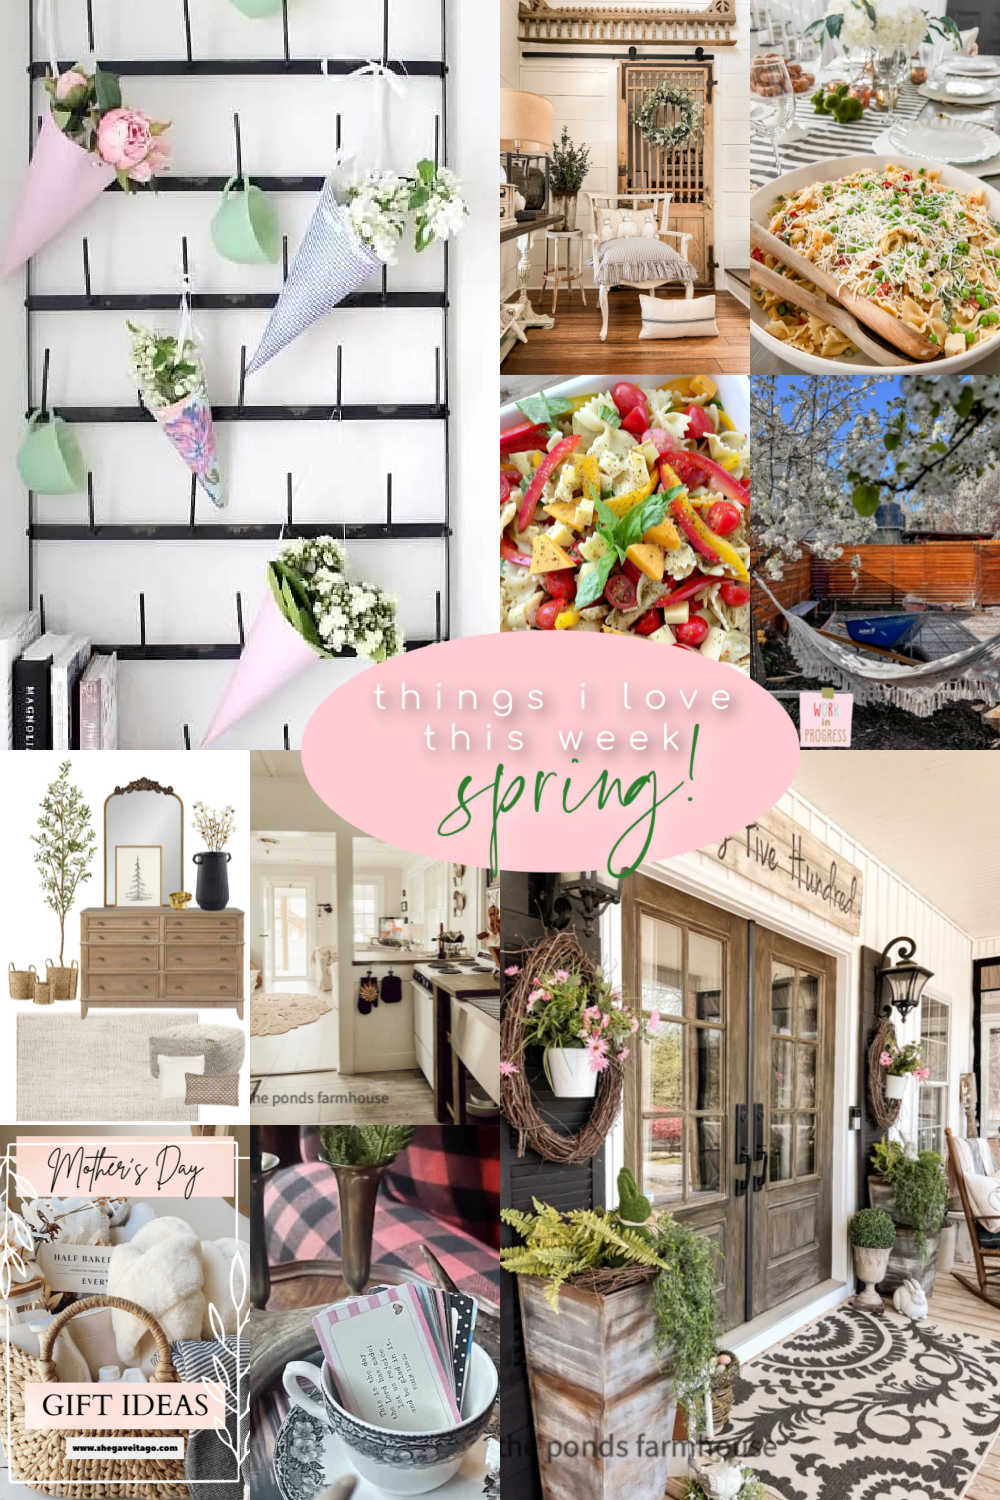 Spring Ideas I Love This Week. Celebrate Spring with these fresh and thoughtful Home Ideas, recipes and gift ideas! 